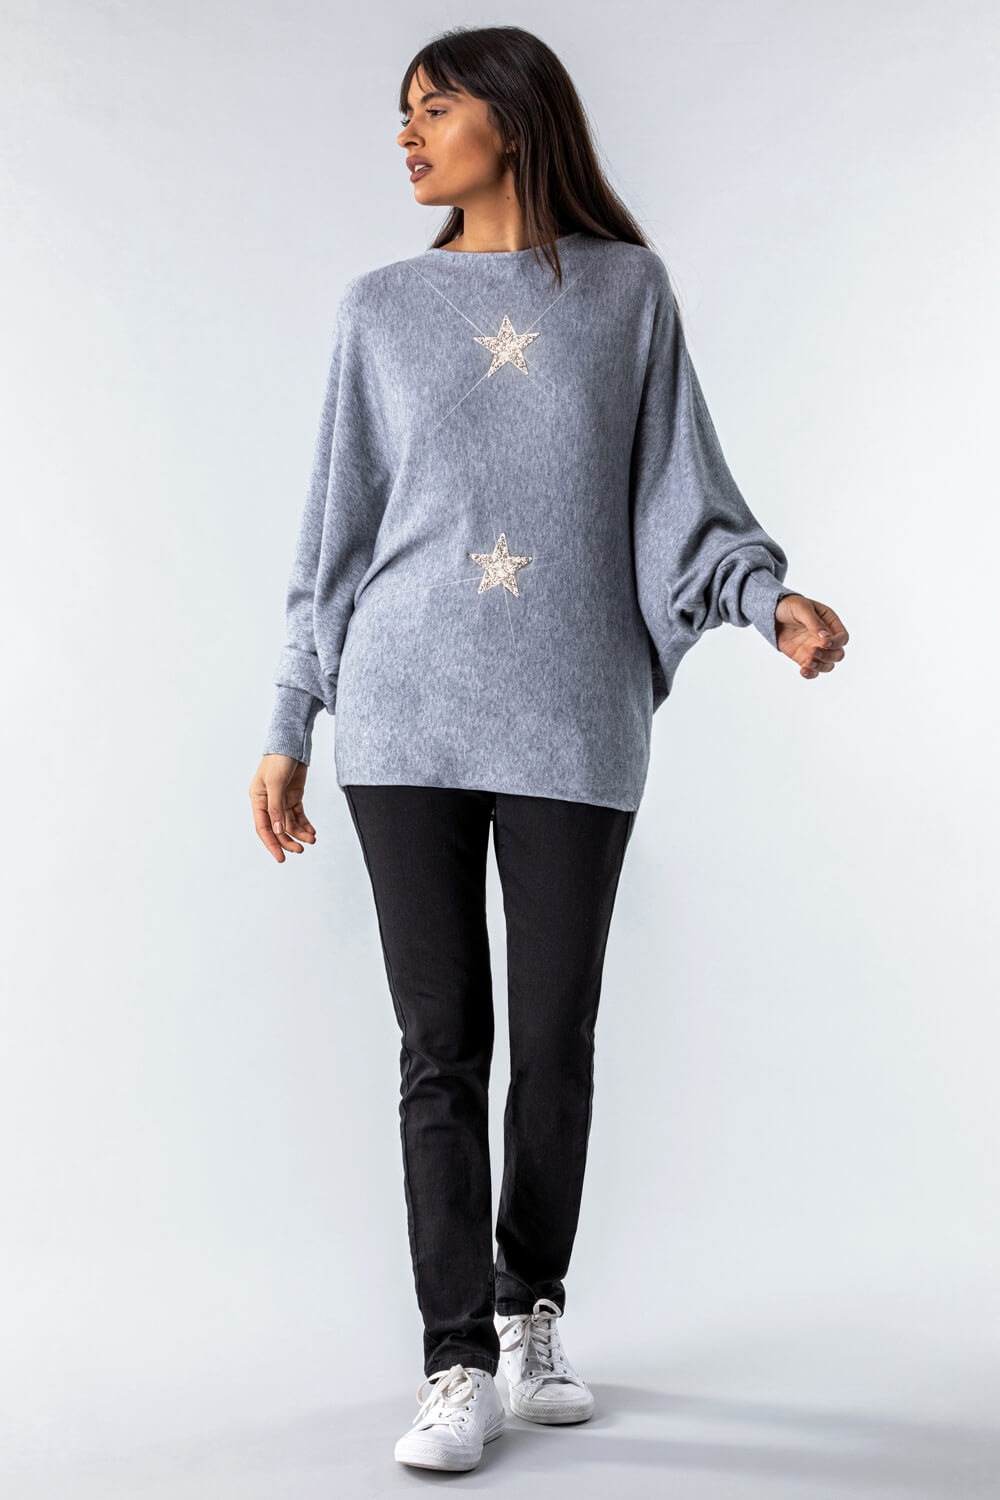 Grey One Size Knitted Star Lounge Jumper, Image 2 of 3